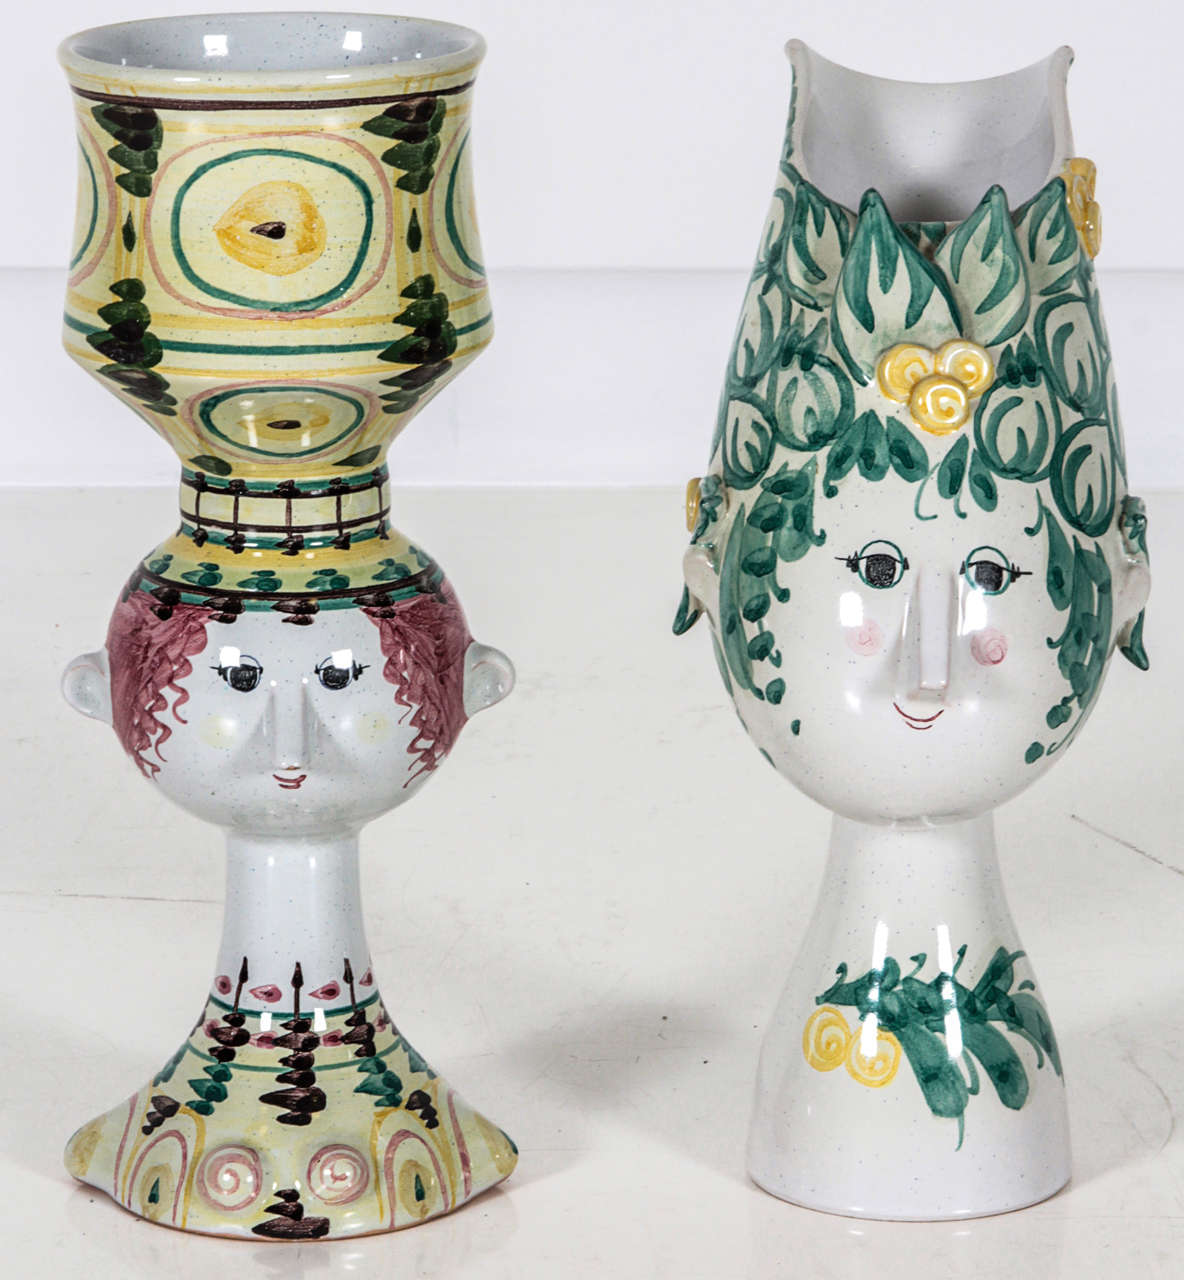 Fantastic hand-painted ceramic bust vessels by famed Danish artist Bjorn Winblad. $1200 each, but make a great statement when paired together.

Left figure measure 12